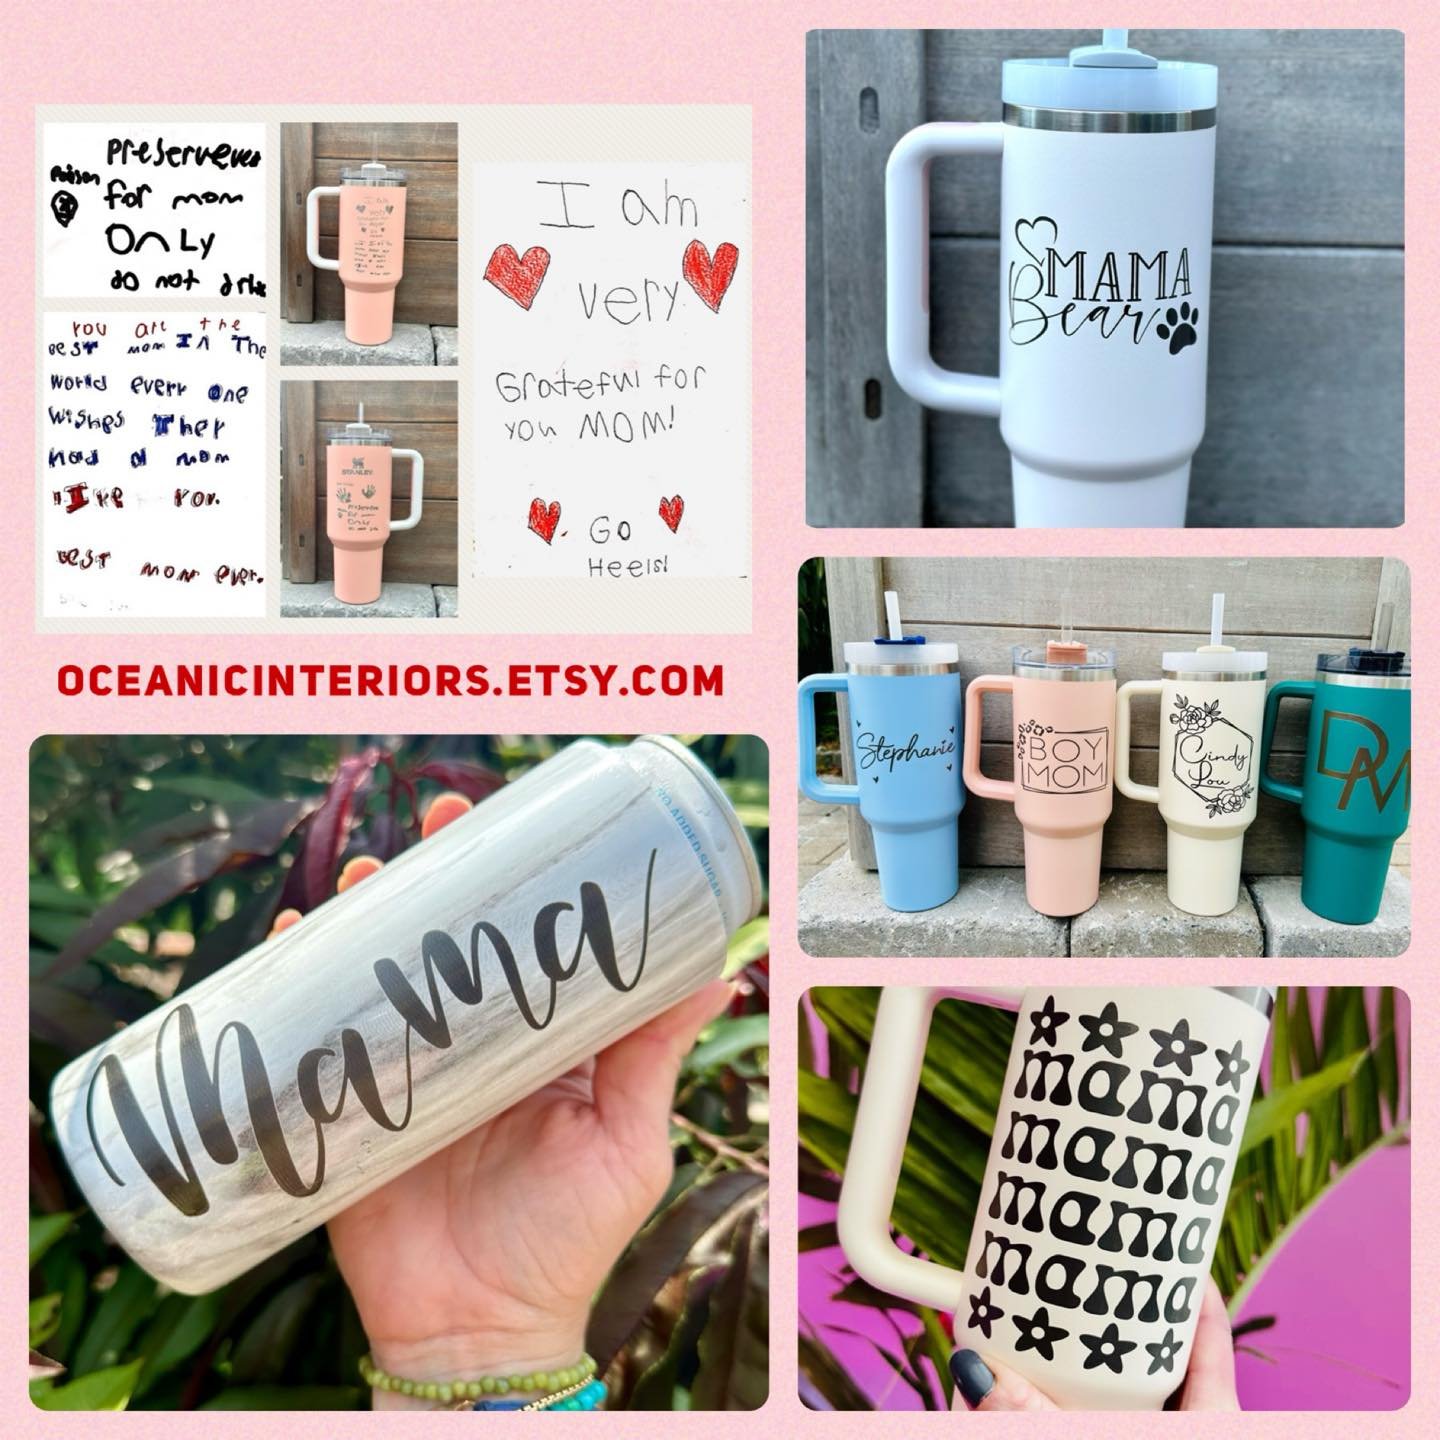 Mother&rsquo;s Day is coming soon! 
Get mom&rsquo;s favorite gift this year - engraved quenchers, IceFlows, shakers, coozies and more. 

@etsy link in bio

#engravedgifts #giftforher #giftsformom #engravedgifts #momsfavorite #bestgiftever #bestkideve